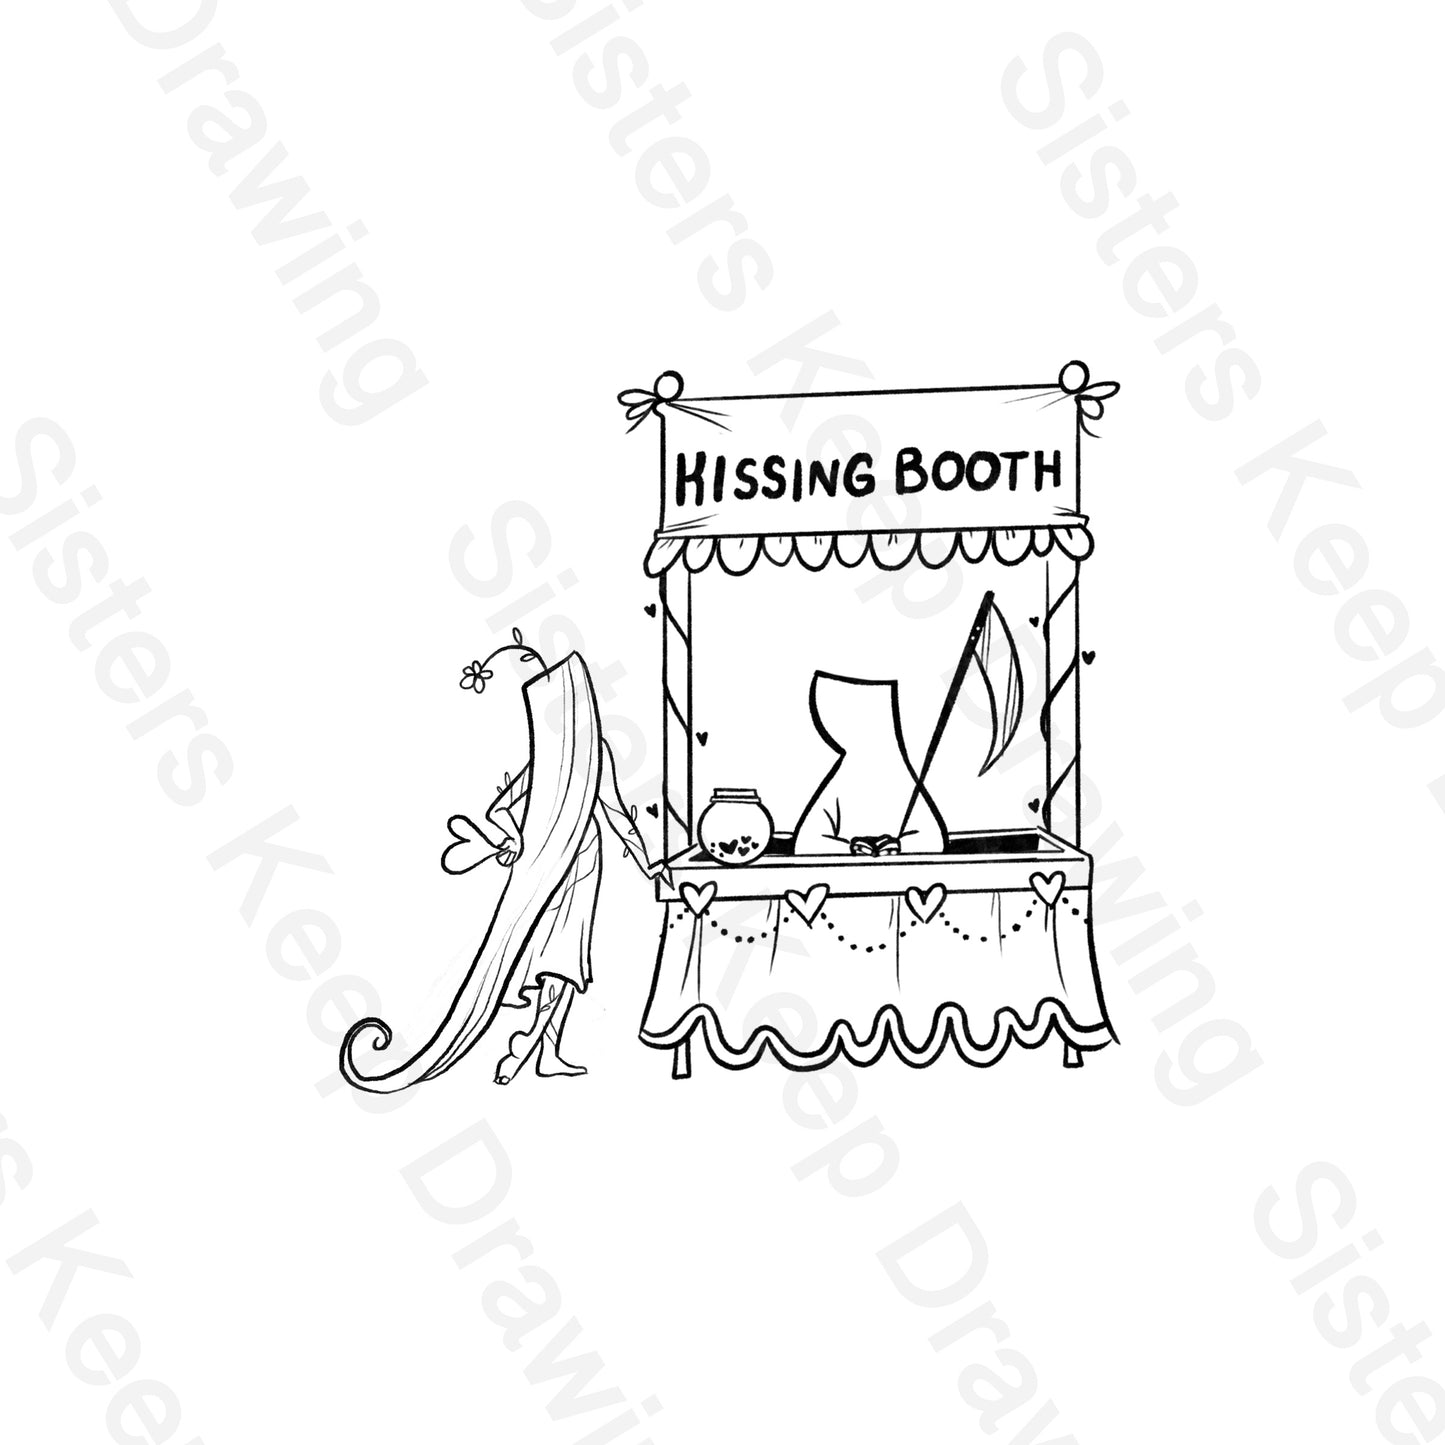 Grim Reaper works kissing booth with Life- Transparent PNG